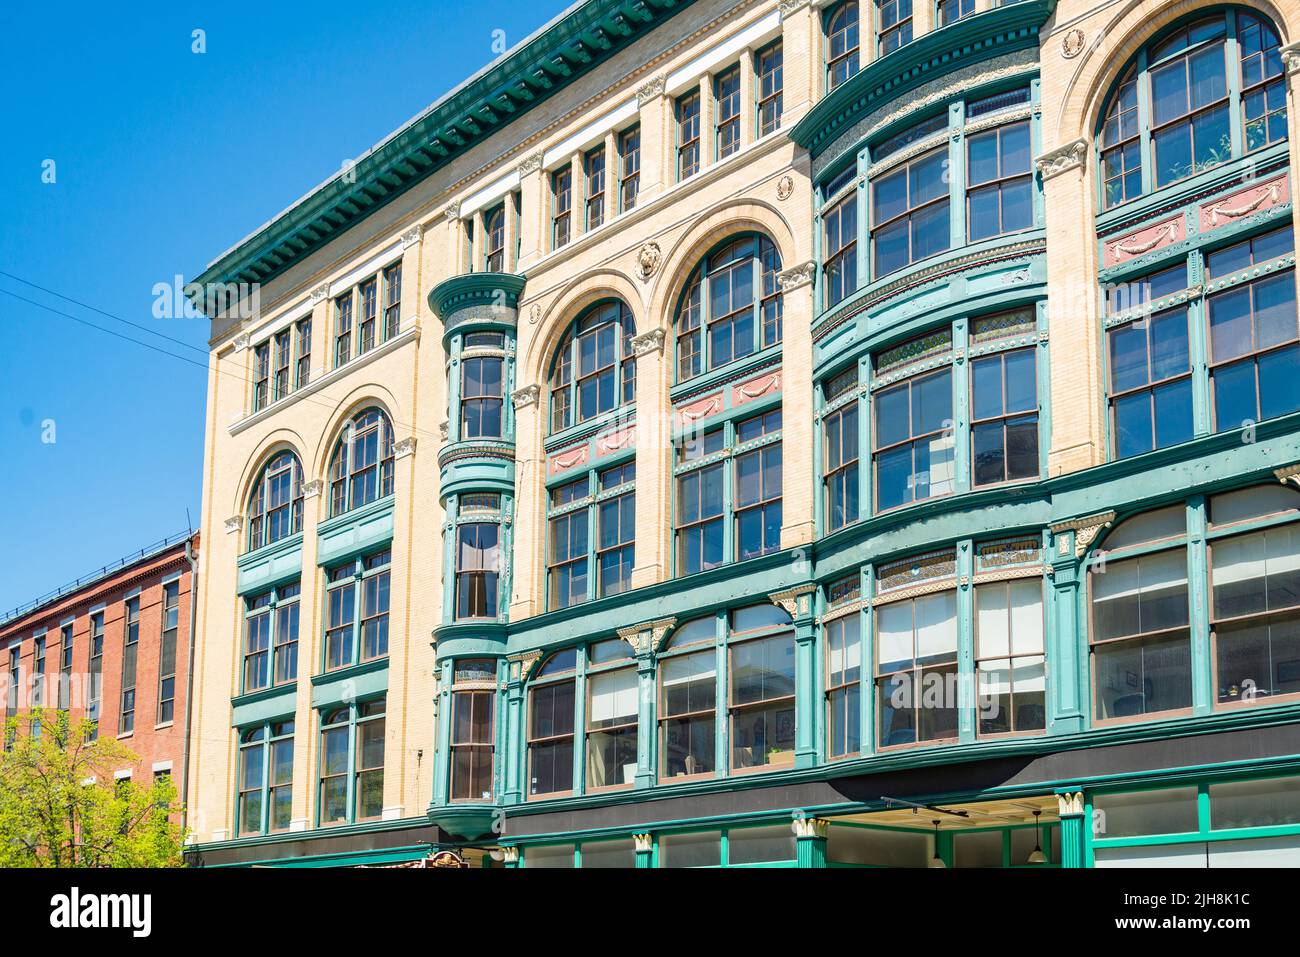 Lowell historic building on Central Street in downtown Lowell, Massachusetts, USA. Stock Photo